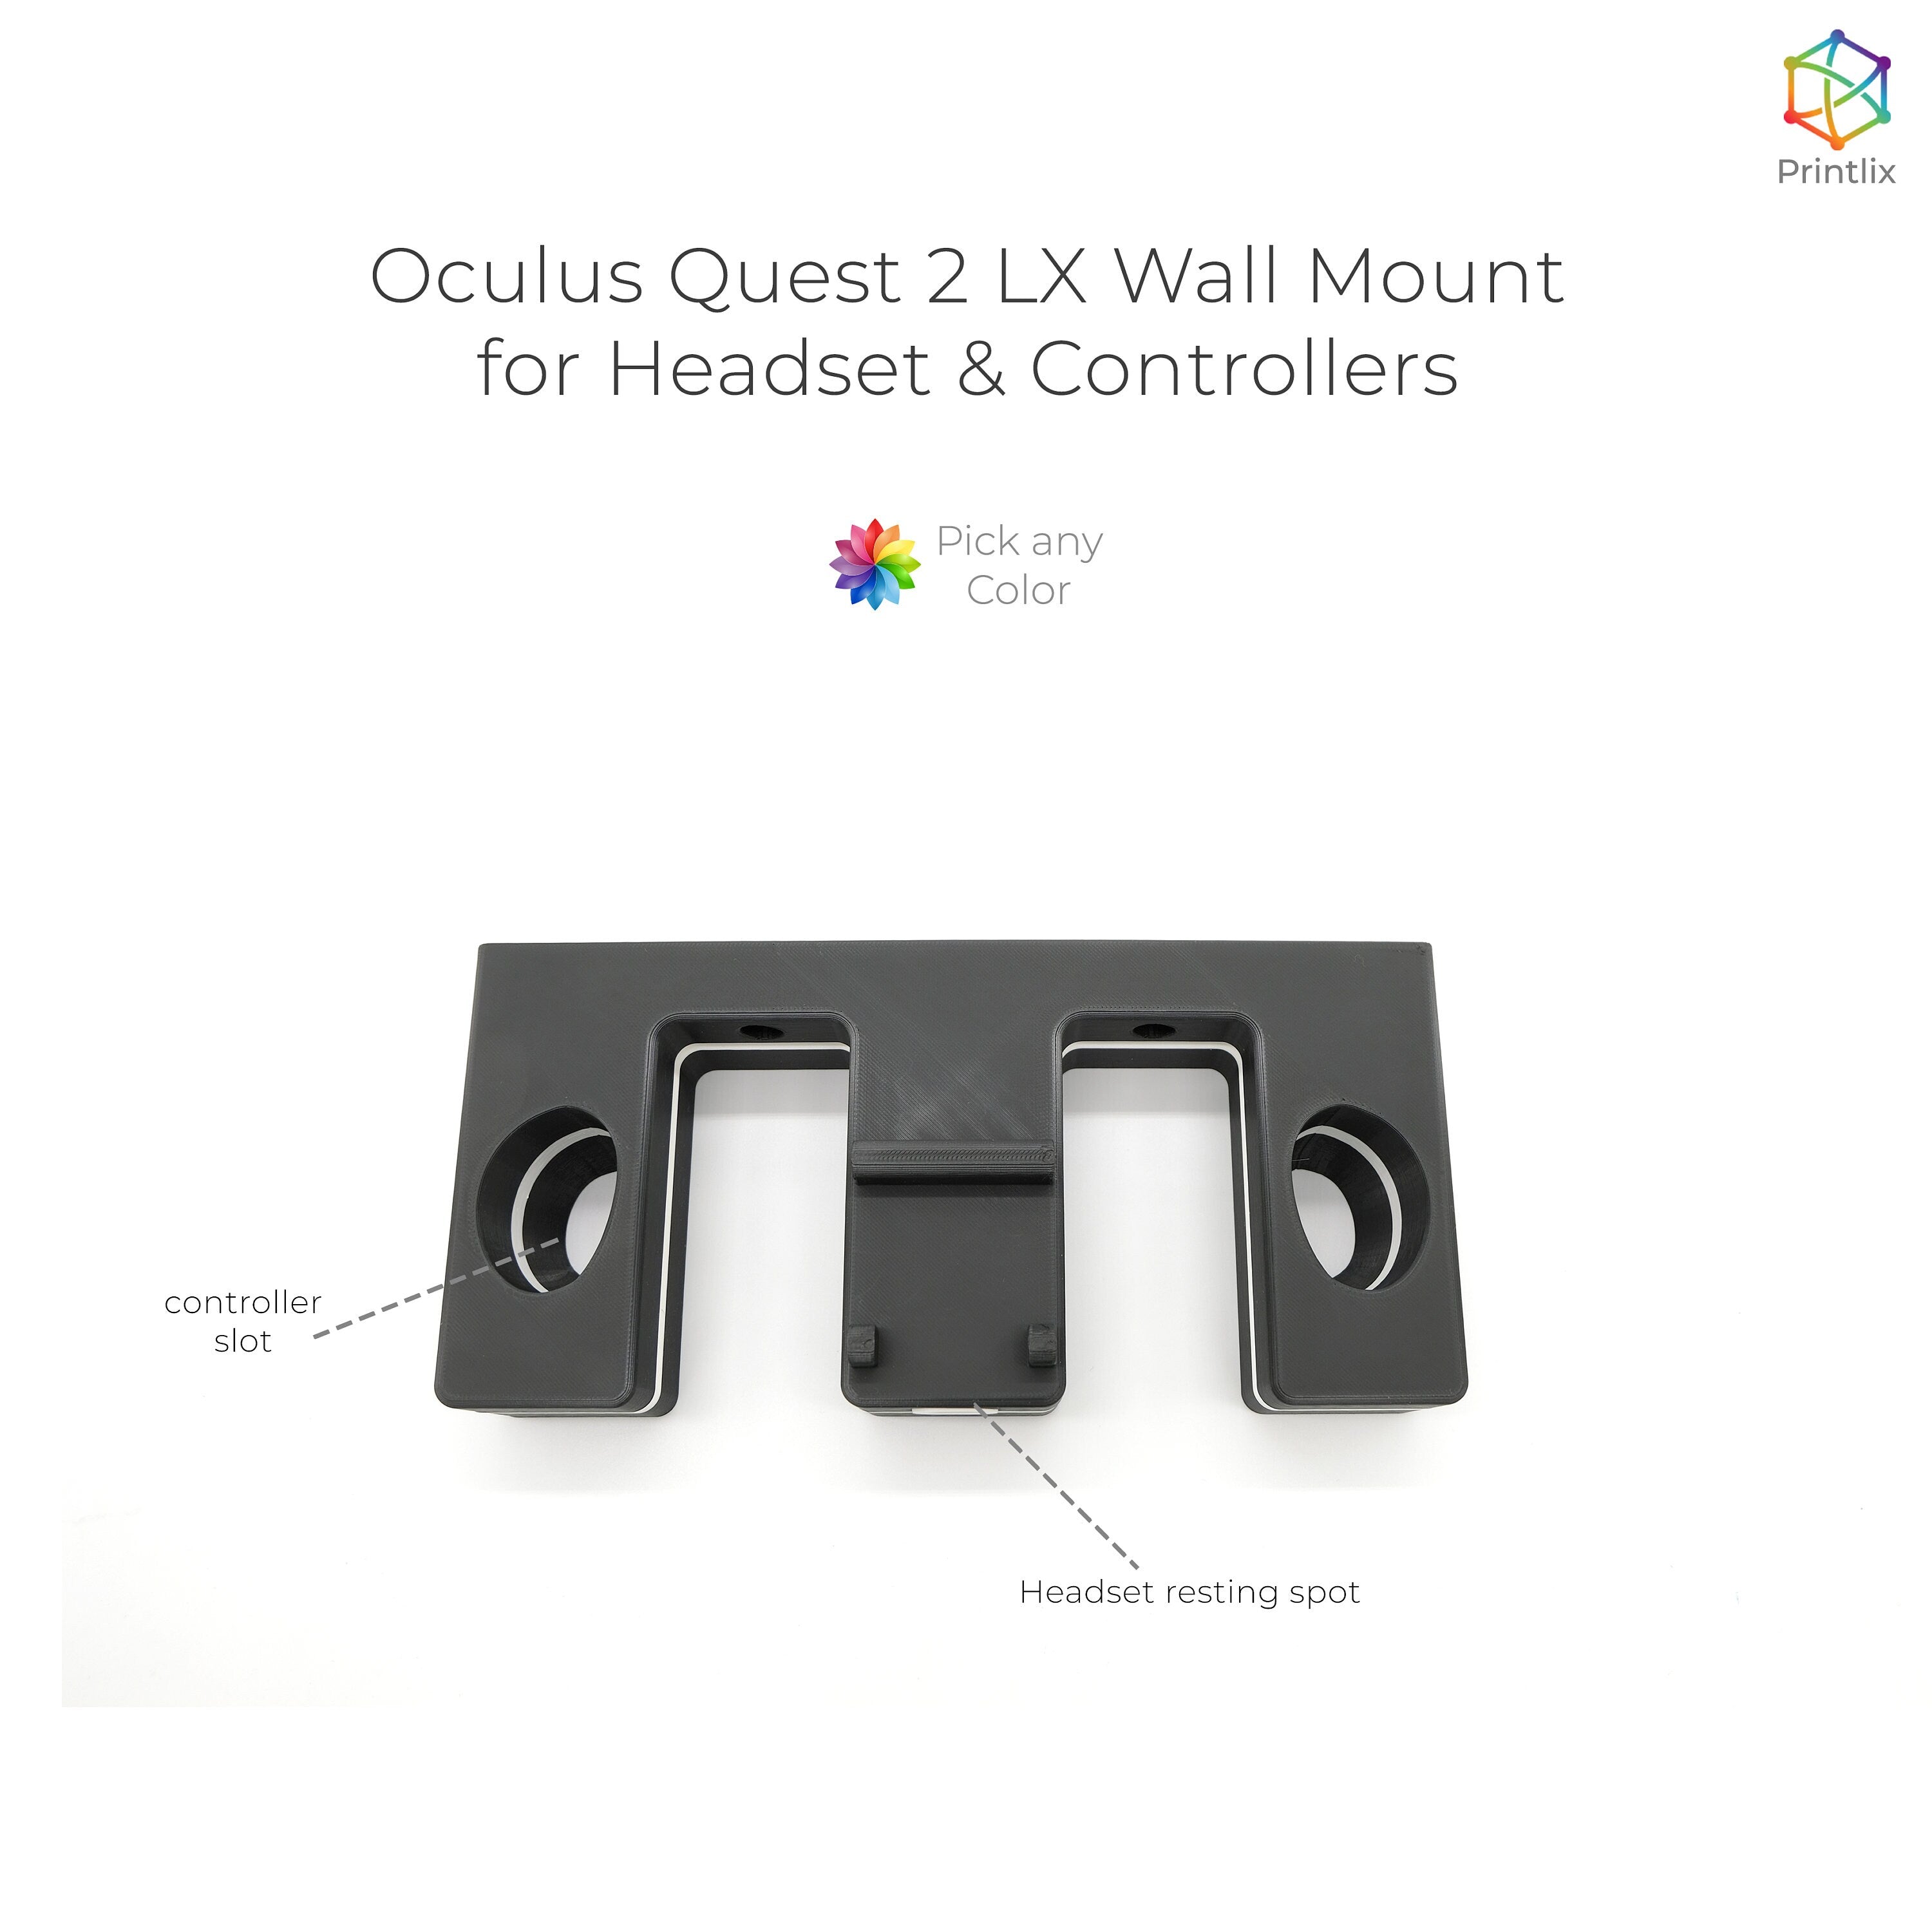 Oculus Quest 2 LX Wall Mount for Headset and Controllers